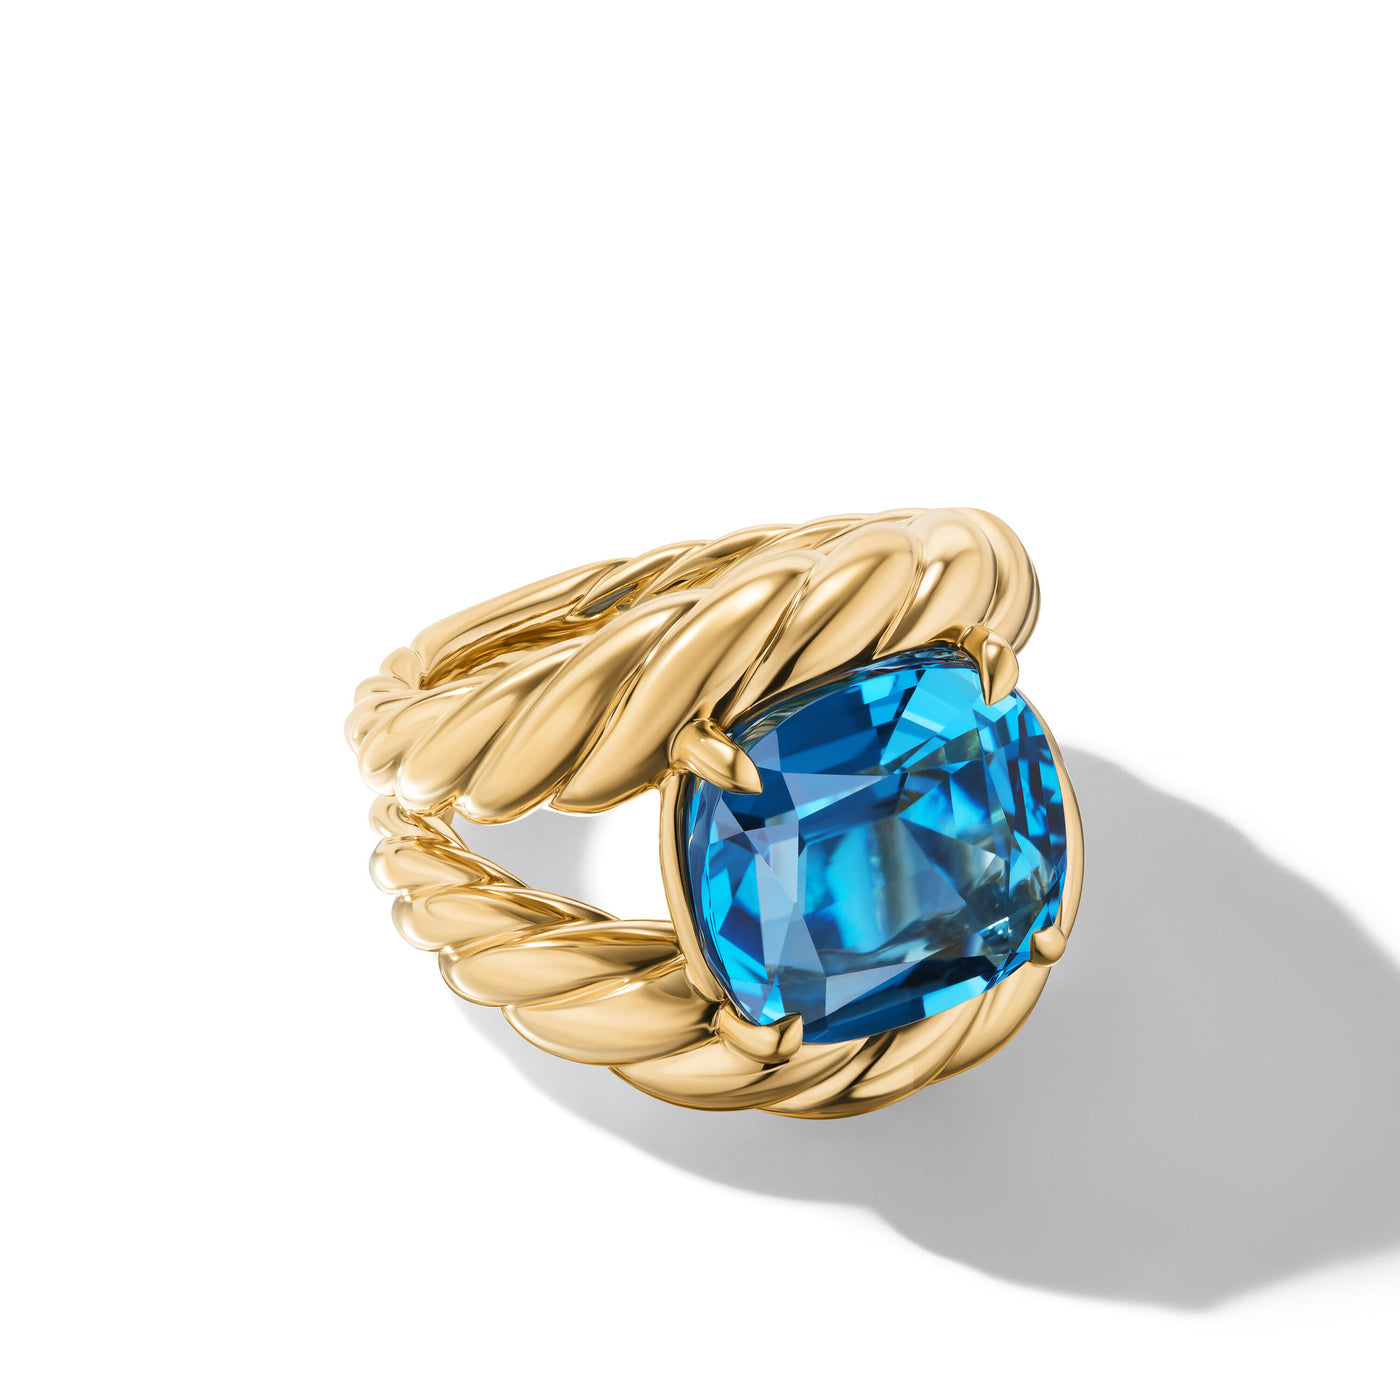 Marbella™ Ring in 18K Yellow Gold with Hampton Blue Topaz\, 20mm